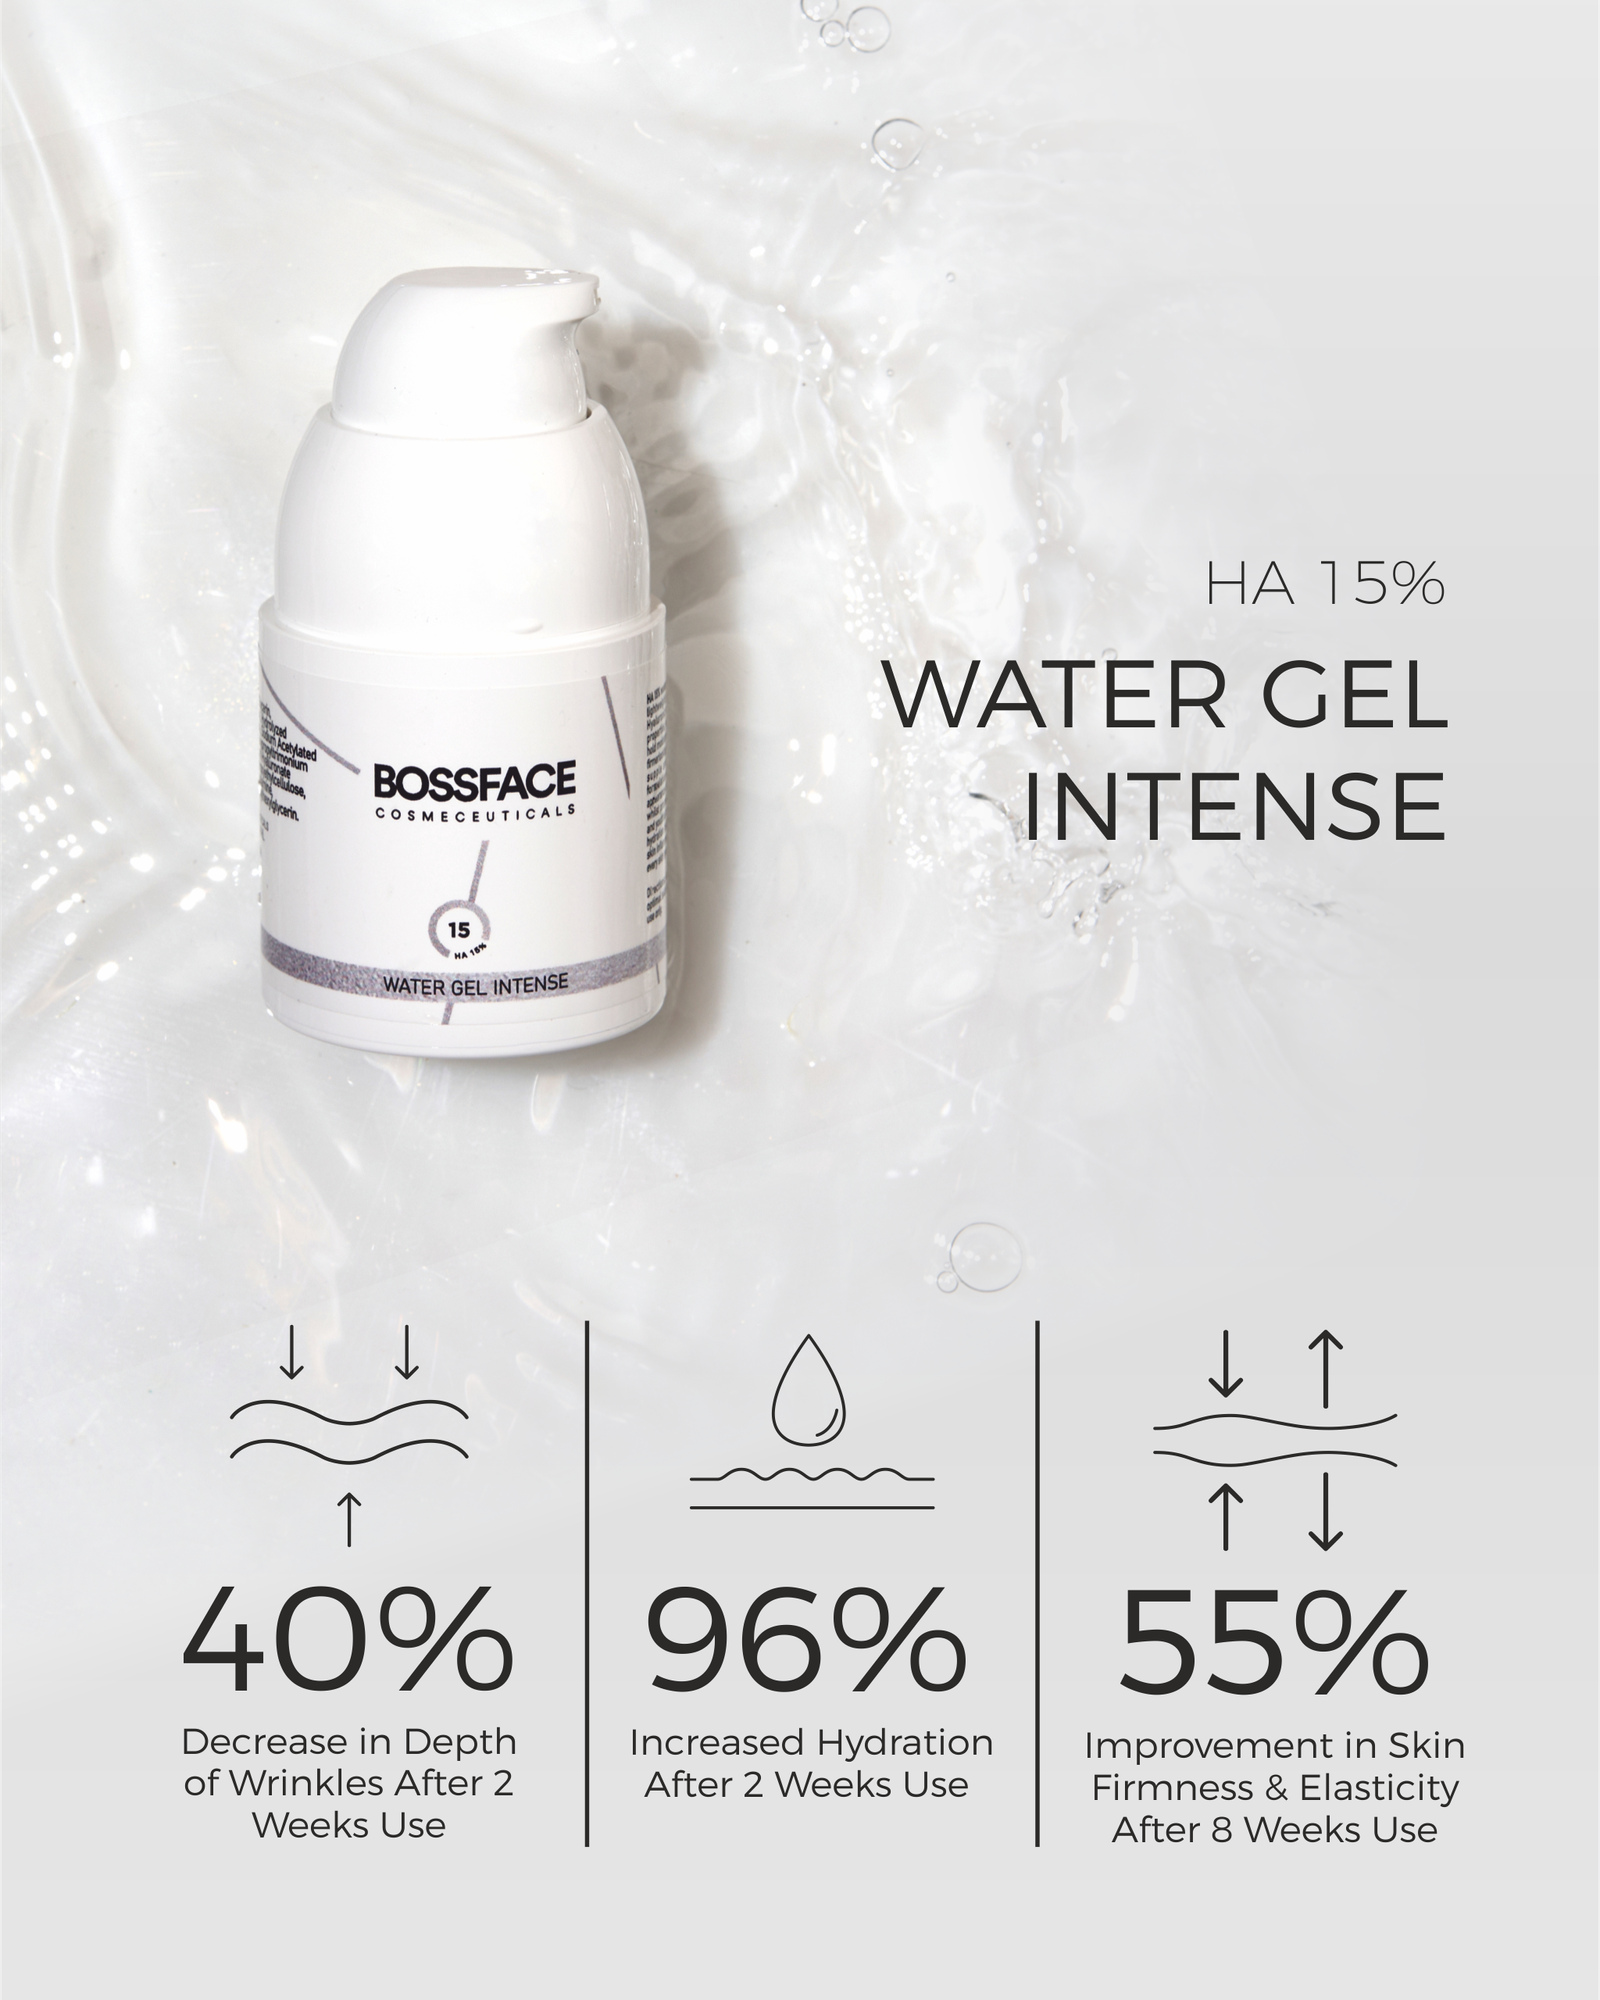 HA water gel skincare product by bossface cosmecuetical